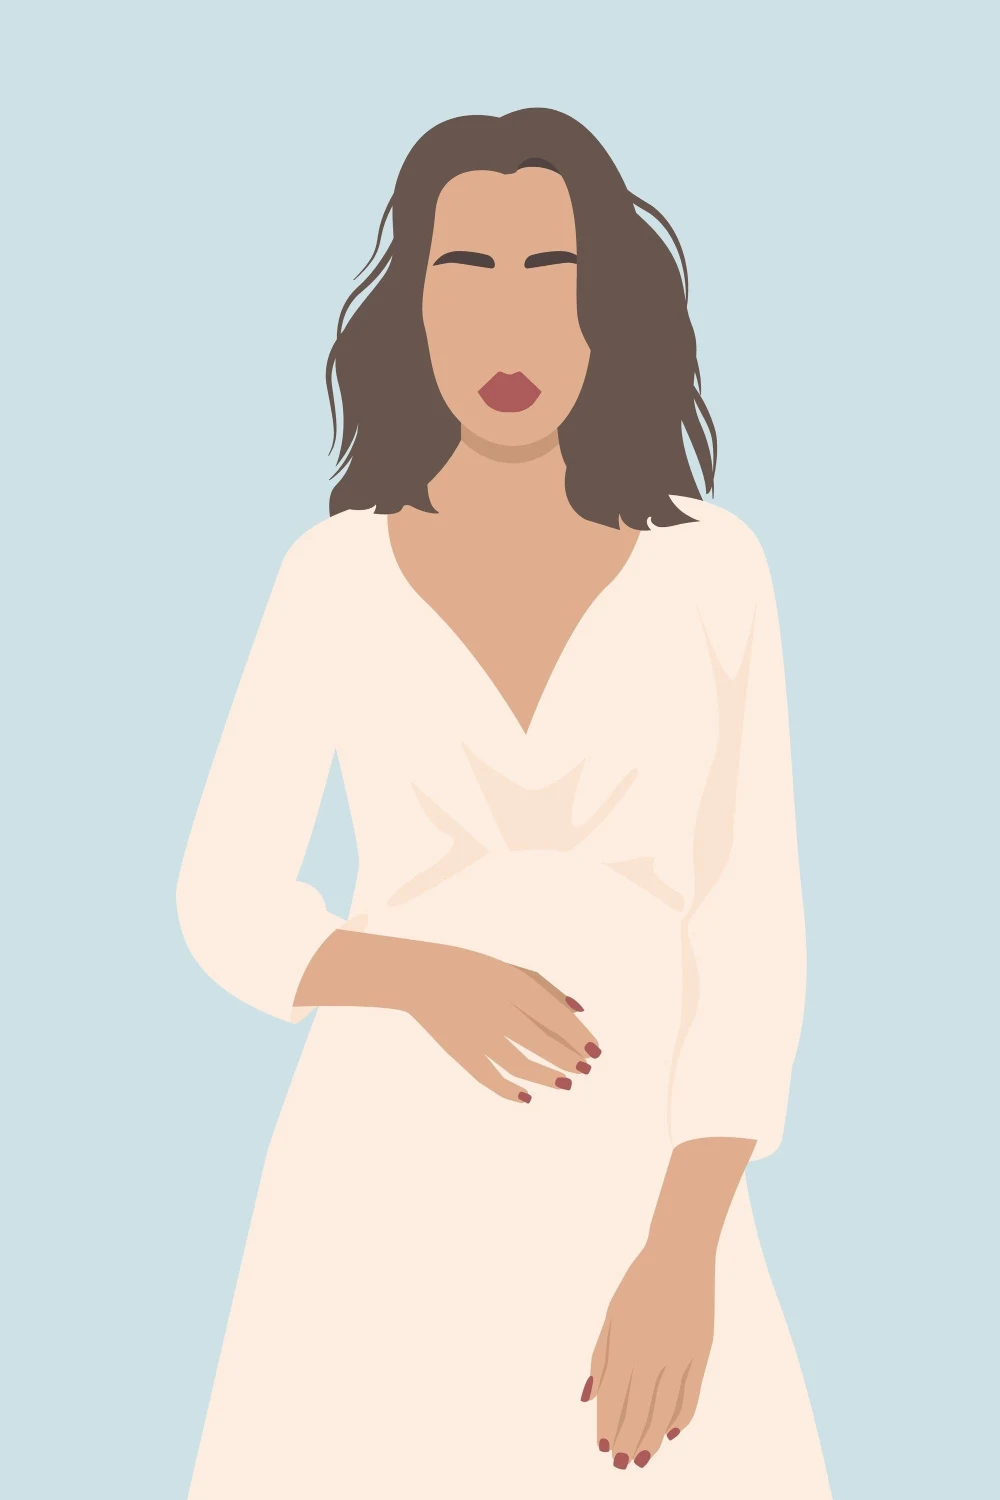 Shoulder Length hair with a woman in illustrated format